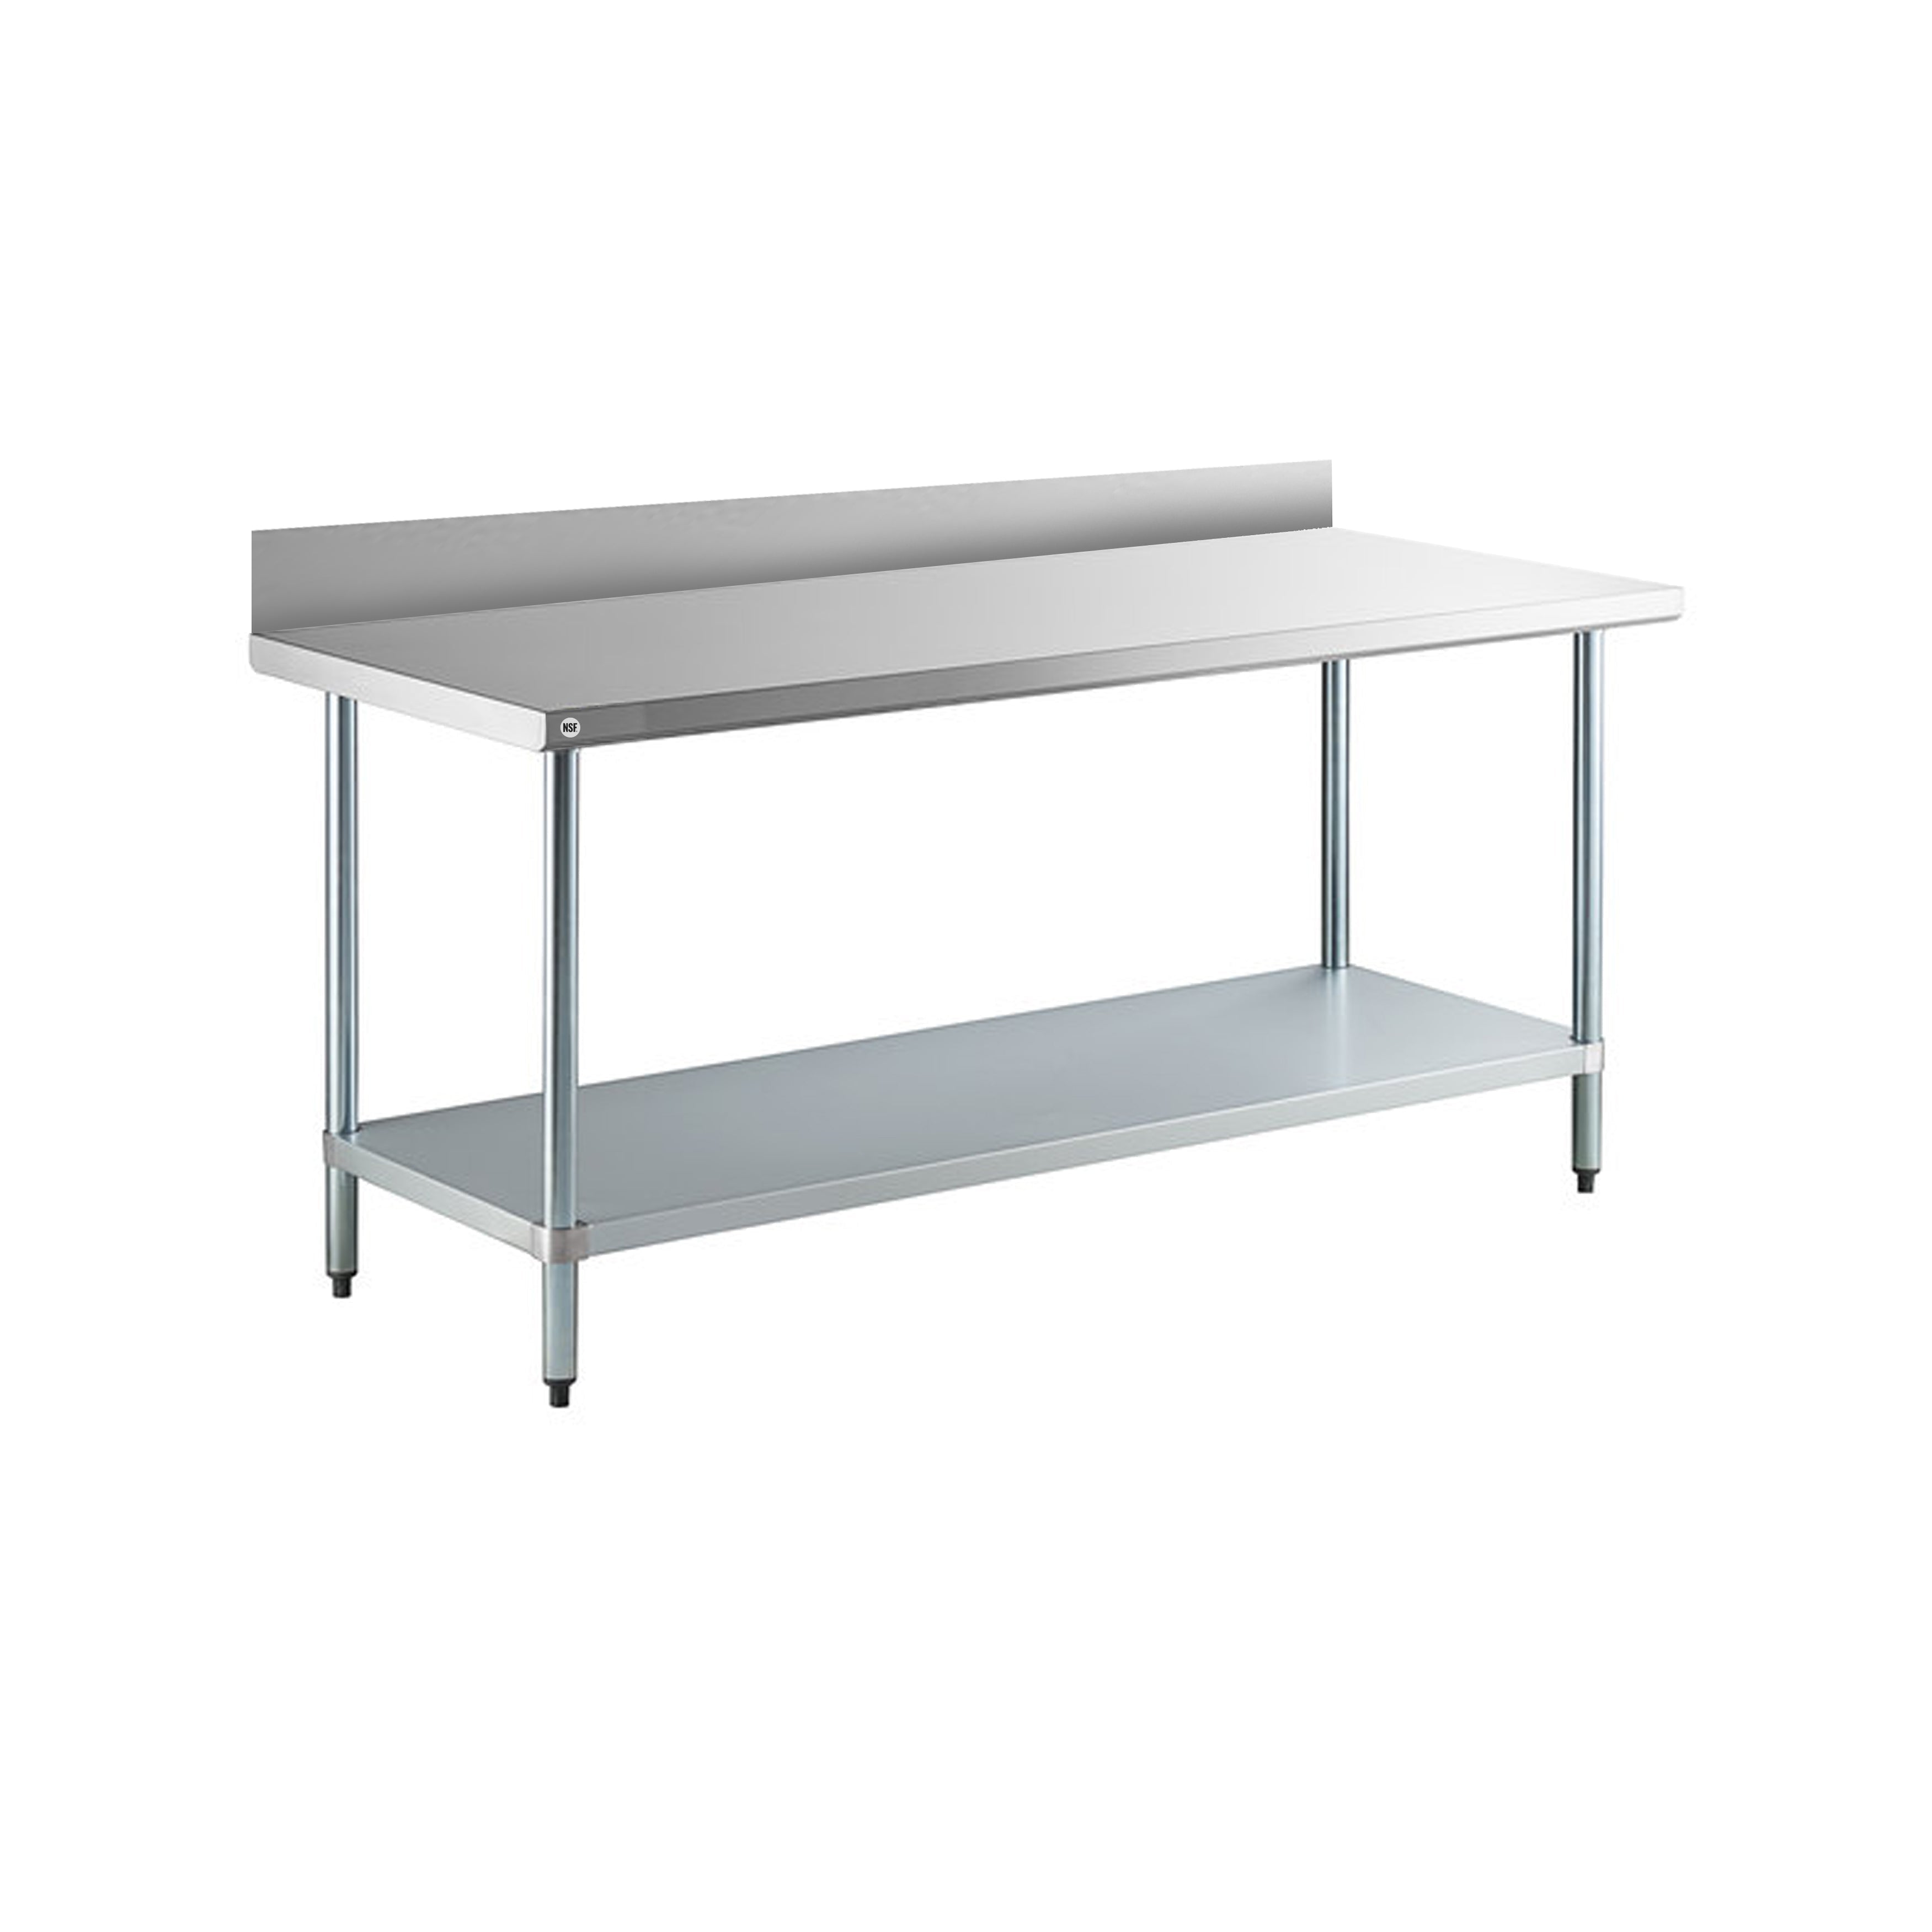 Omcan - 22091, Commercial 30" x 84" Stainless Steel Kitchen Work Table with 4" BackSplash 1600lbs Light Duty